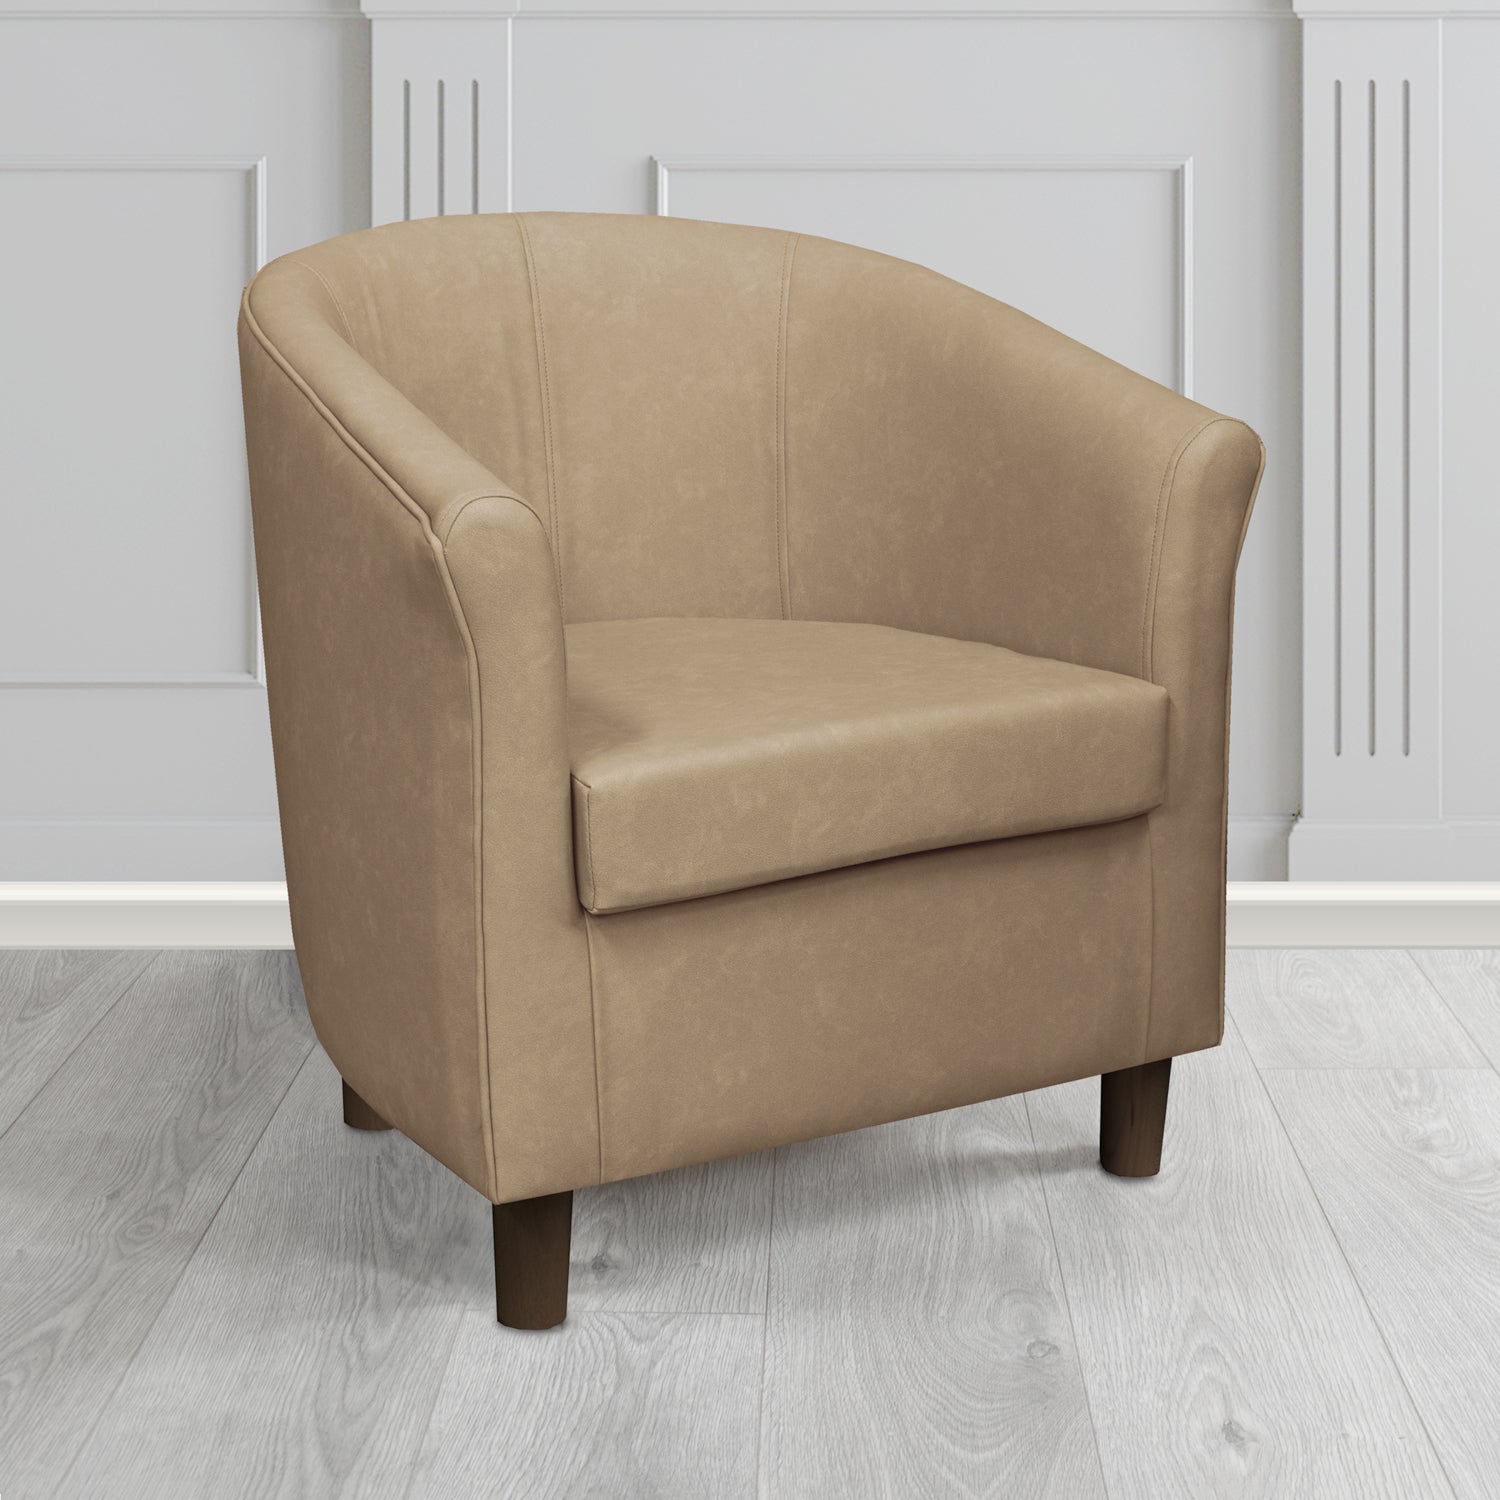 Tuscany Tub Chair in Infiniti Caramel INF1847 Antimicrobial Crib 5 Faux Leather - The Tub Chair Shop